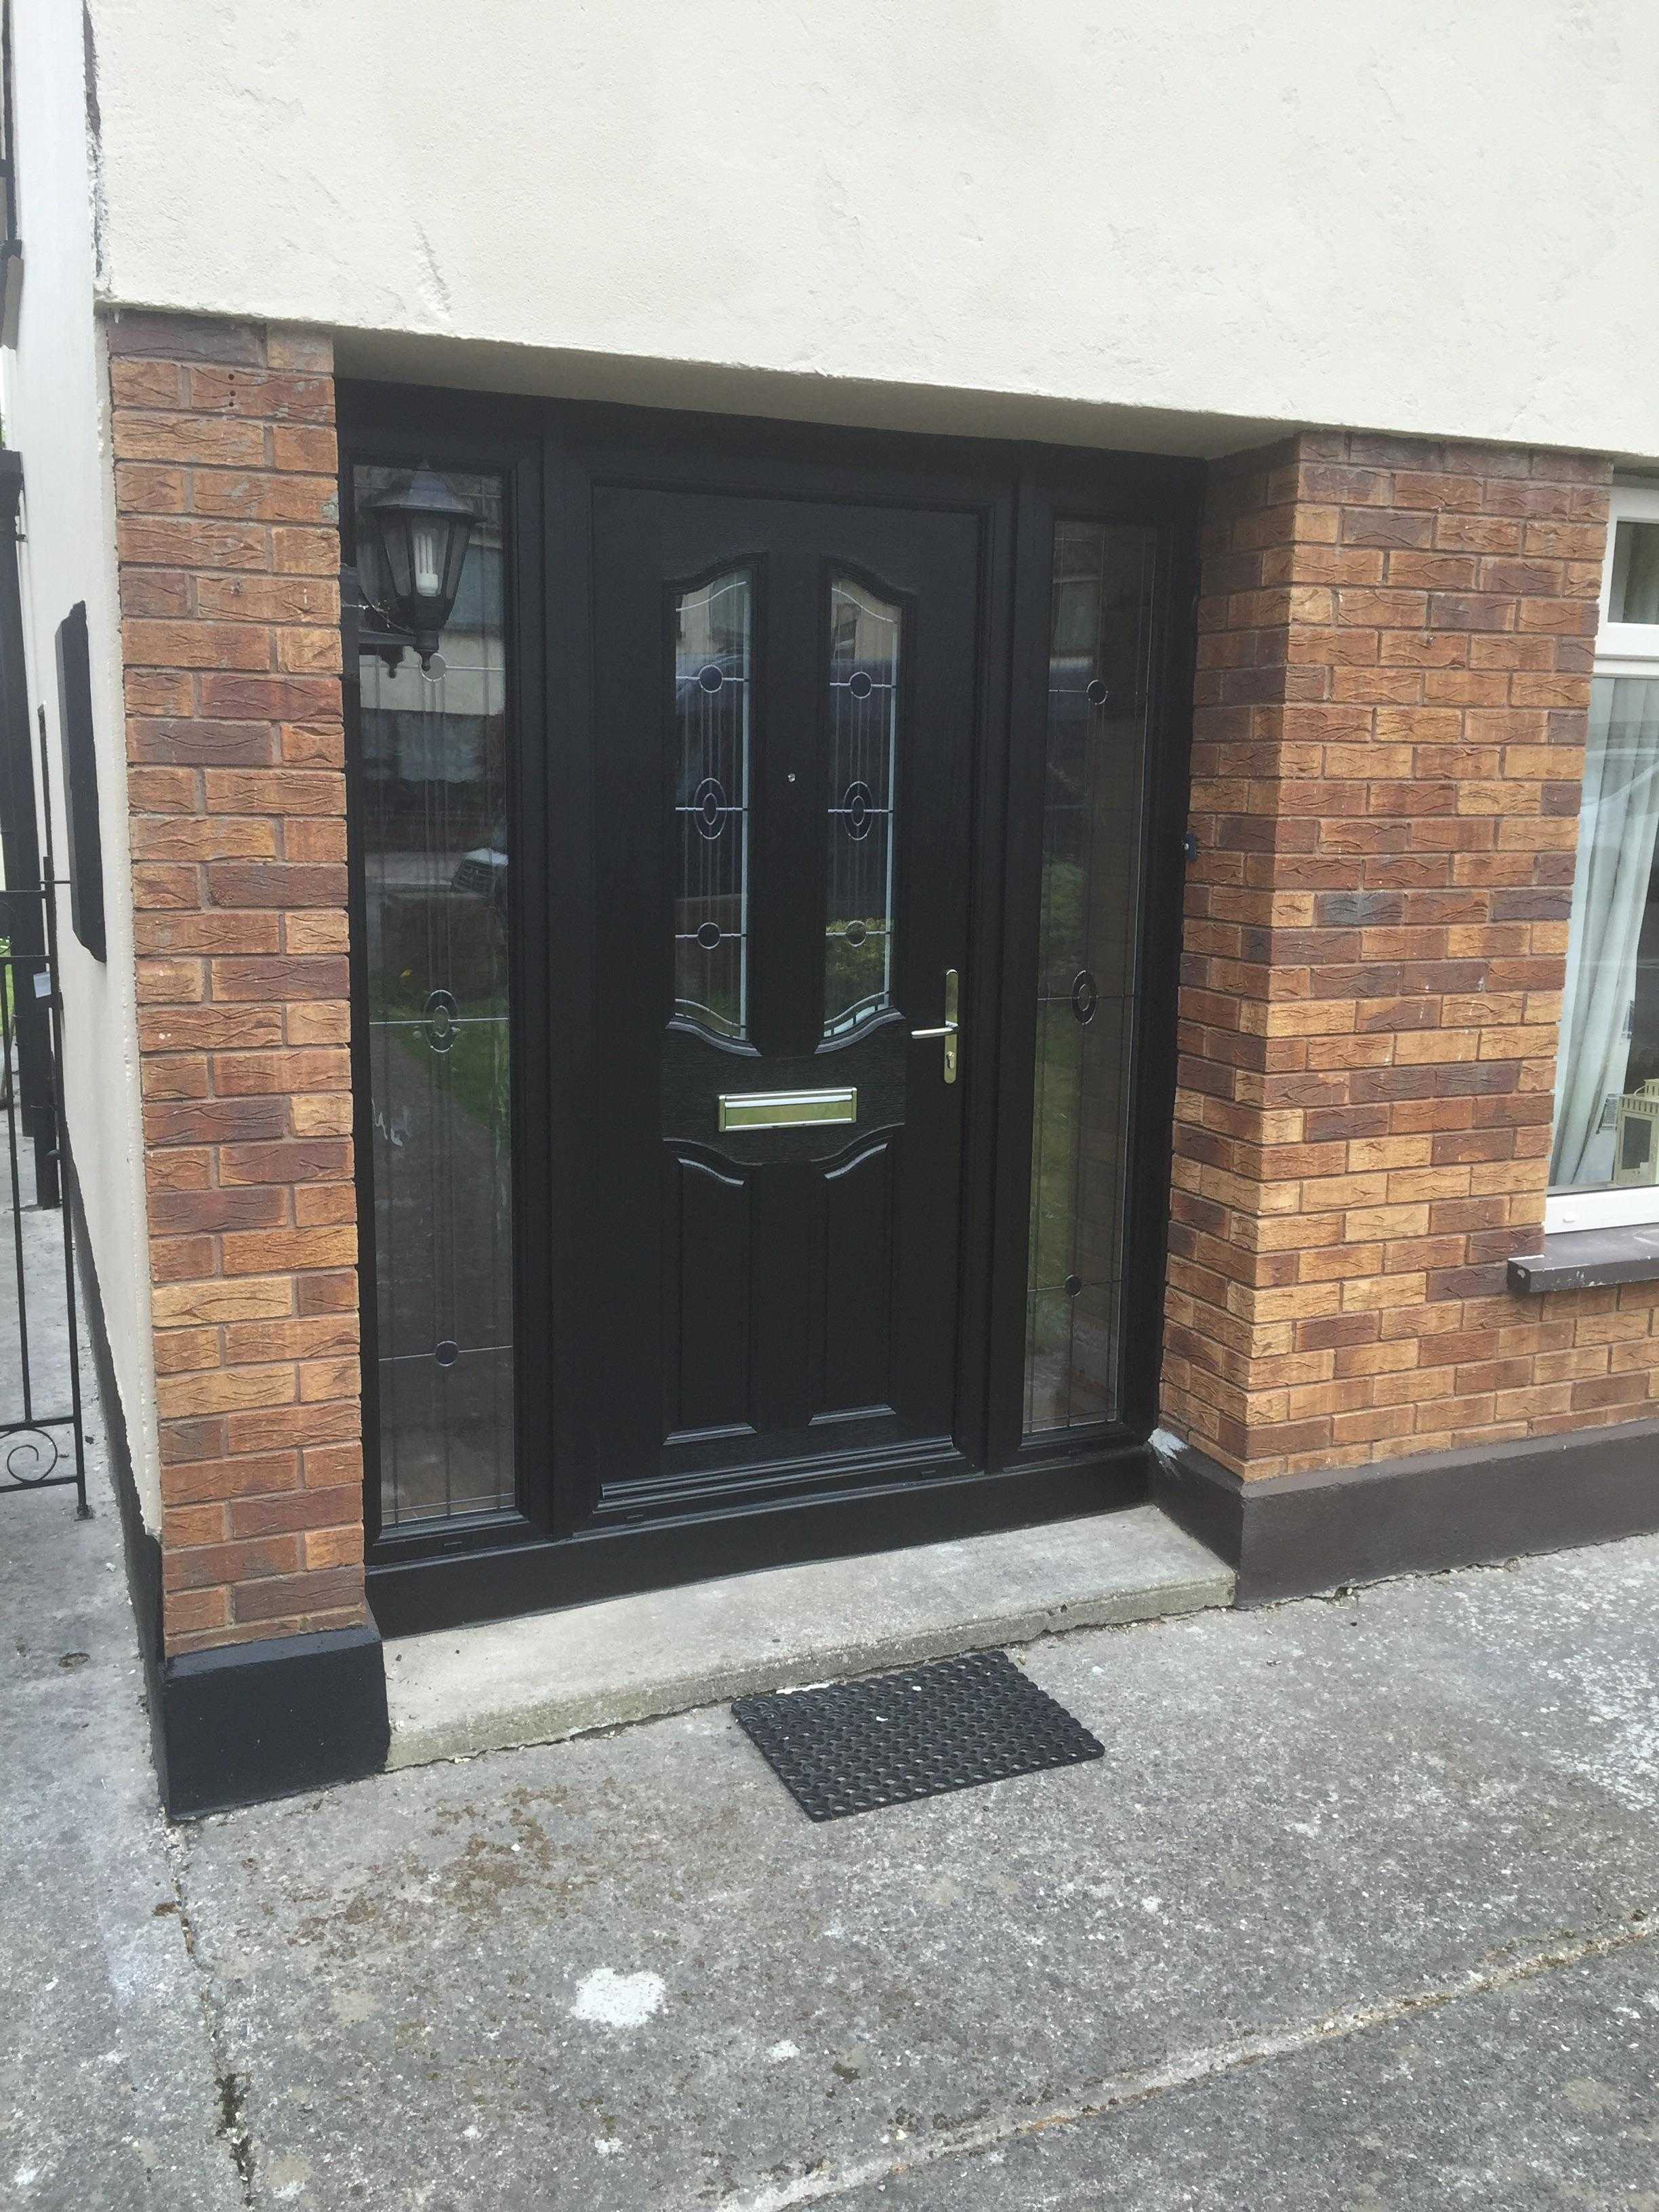 BLACK APEER APL2 COMPOSITE FRONT DOOR FITTED BY ASGARD WINDOWS IN DUBLIN.